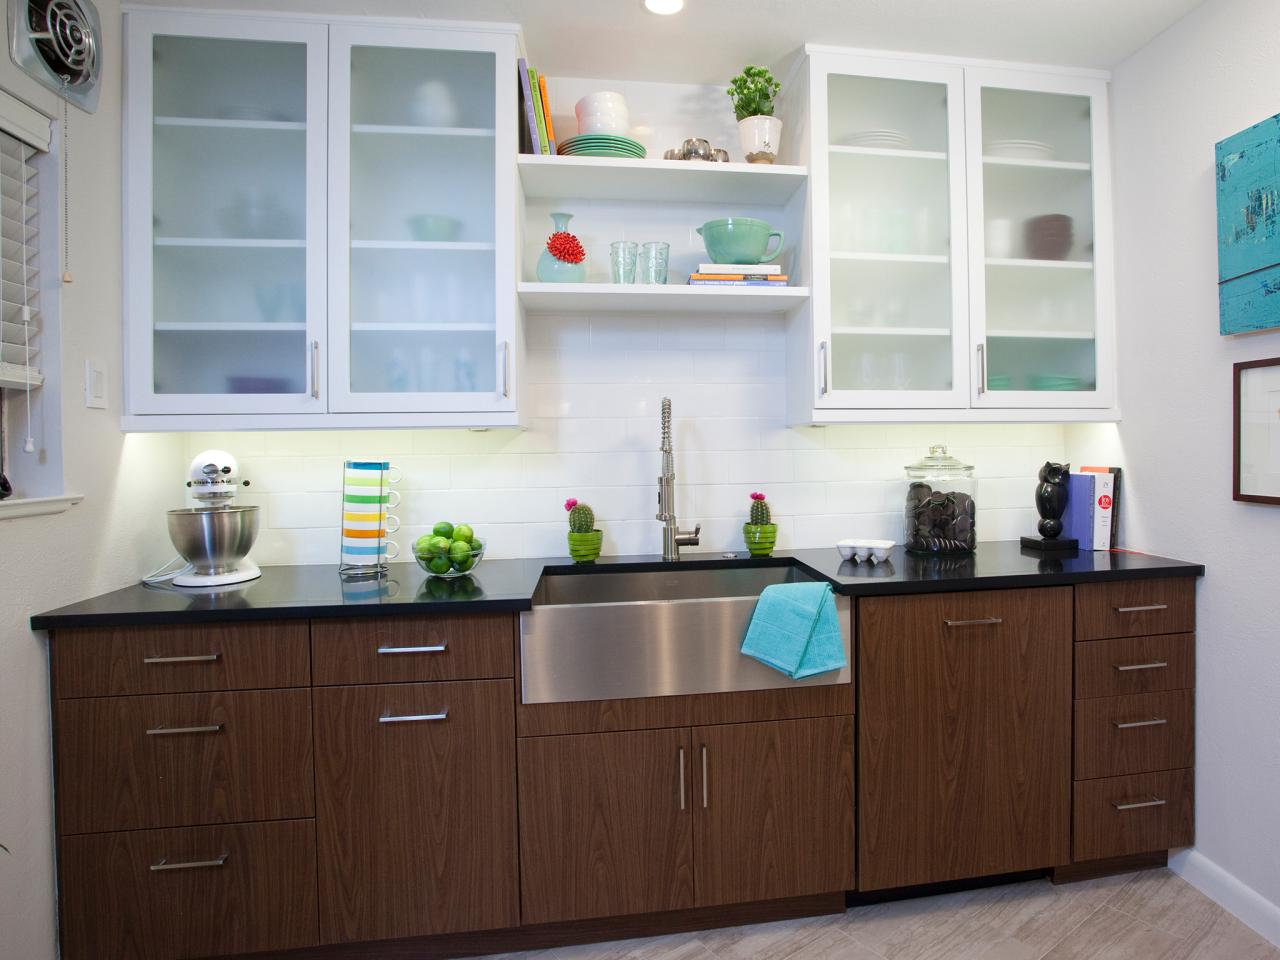  Kitchen Cabinet Design Pictures Ideas Tips From HGTV 